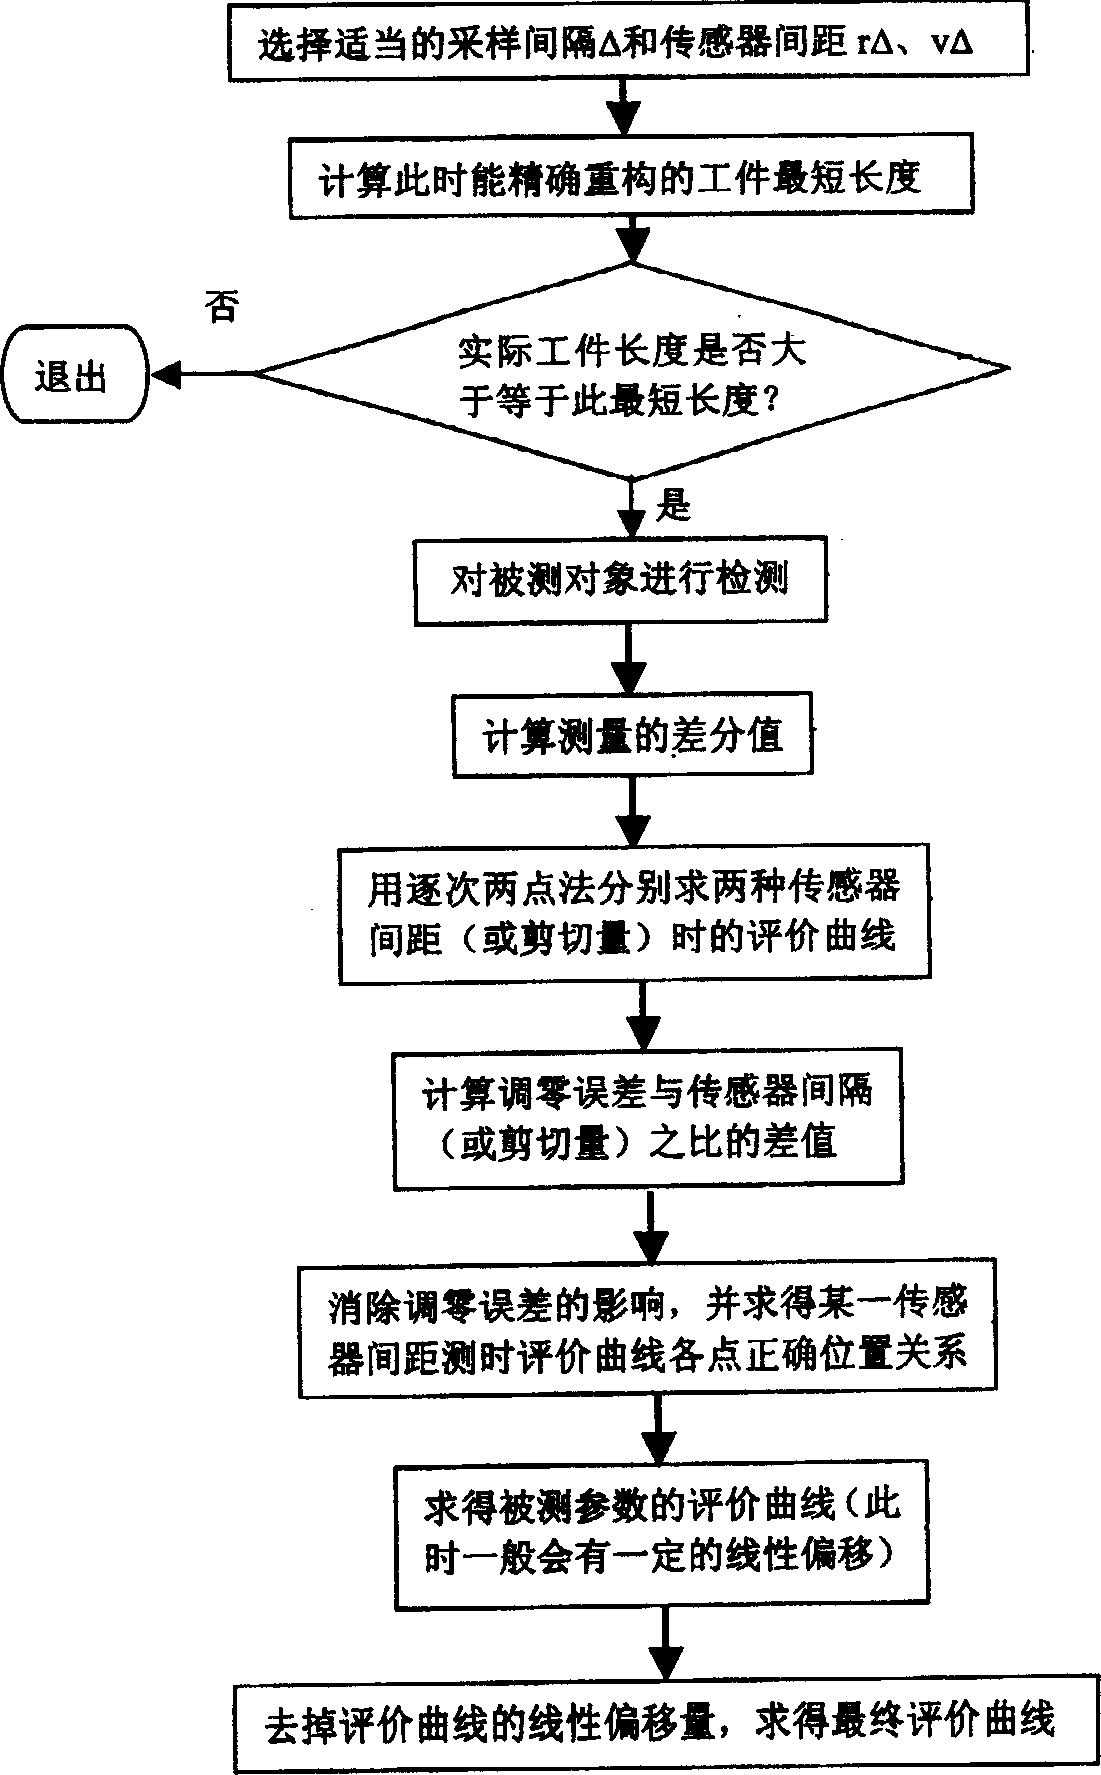 Method for utilizing time domain method to make difference measurement of accurate reconfiguration